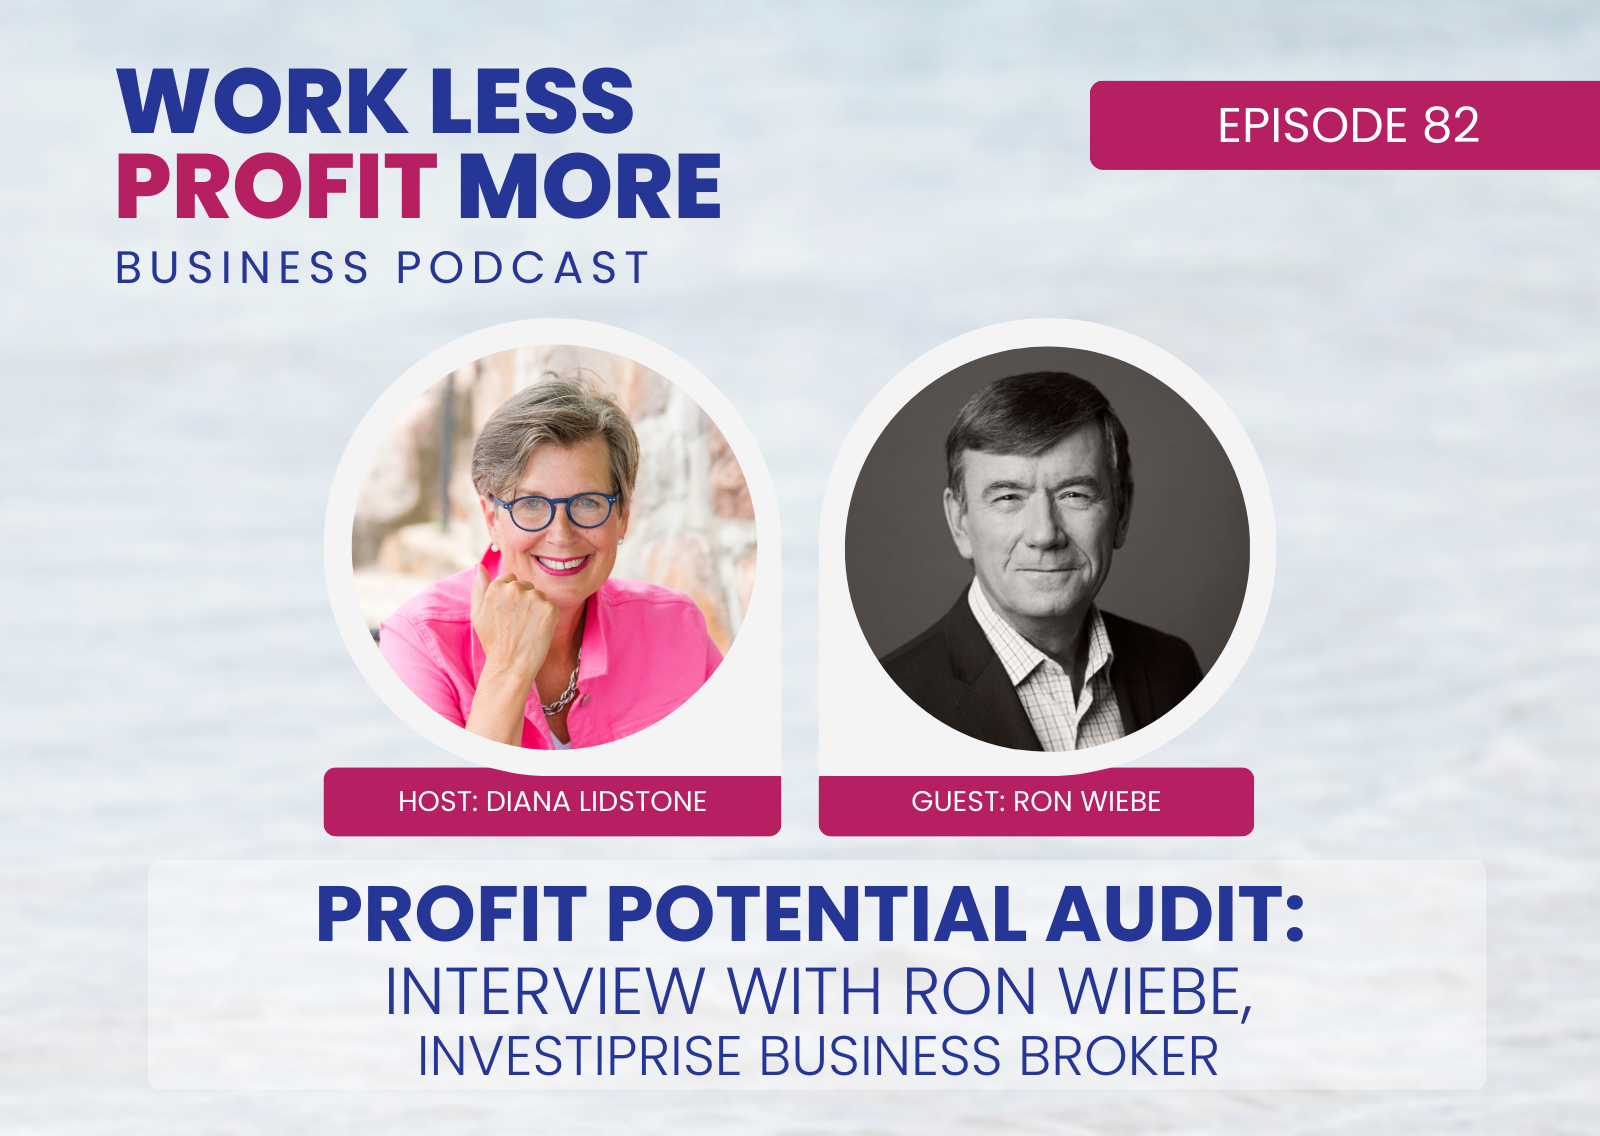 Profit Potential Audit- Interview with ron wiebe, Investiprise Business Broker